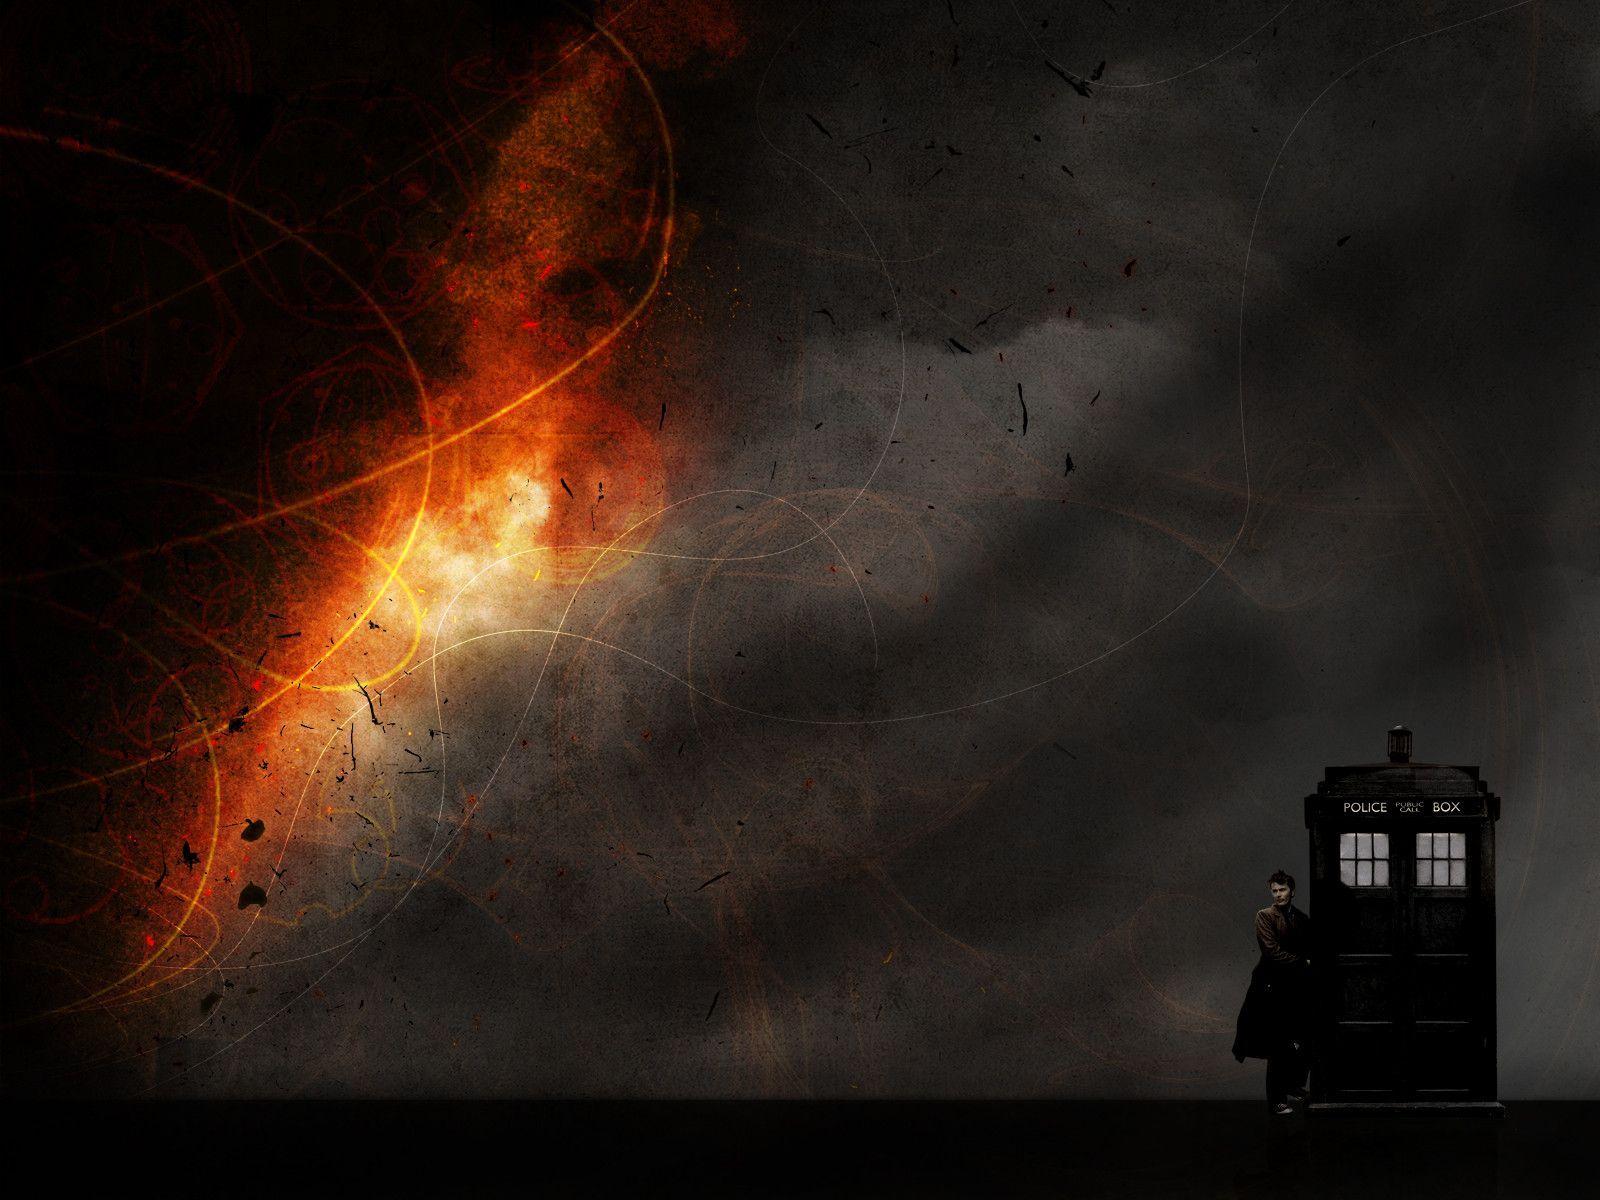 Doctor Who HD Wallpaper, Doctor Who, Doctor Who Wallpaper HD